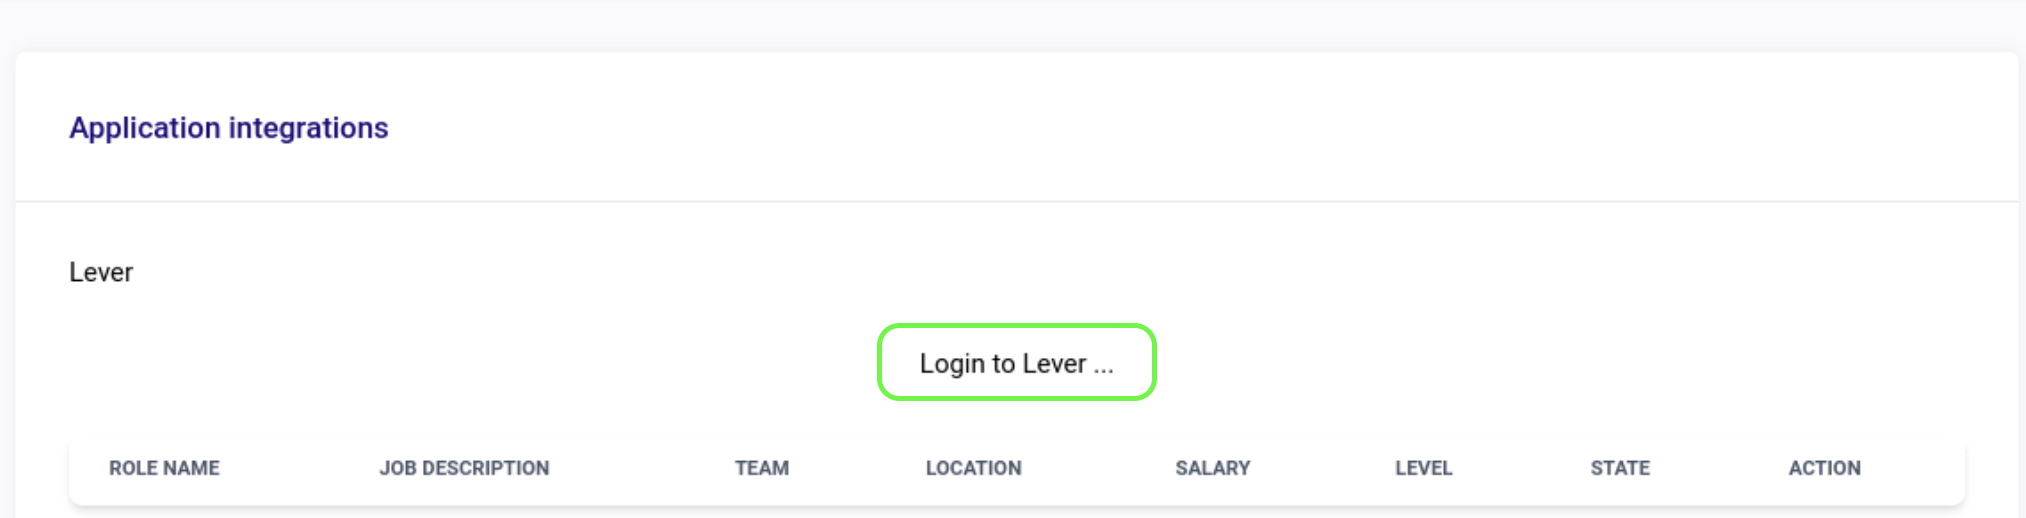 Login to Lever outlined on Walzay Application integrations page